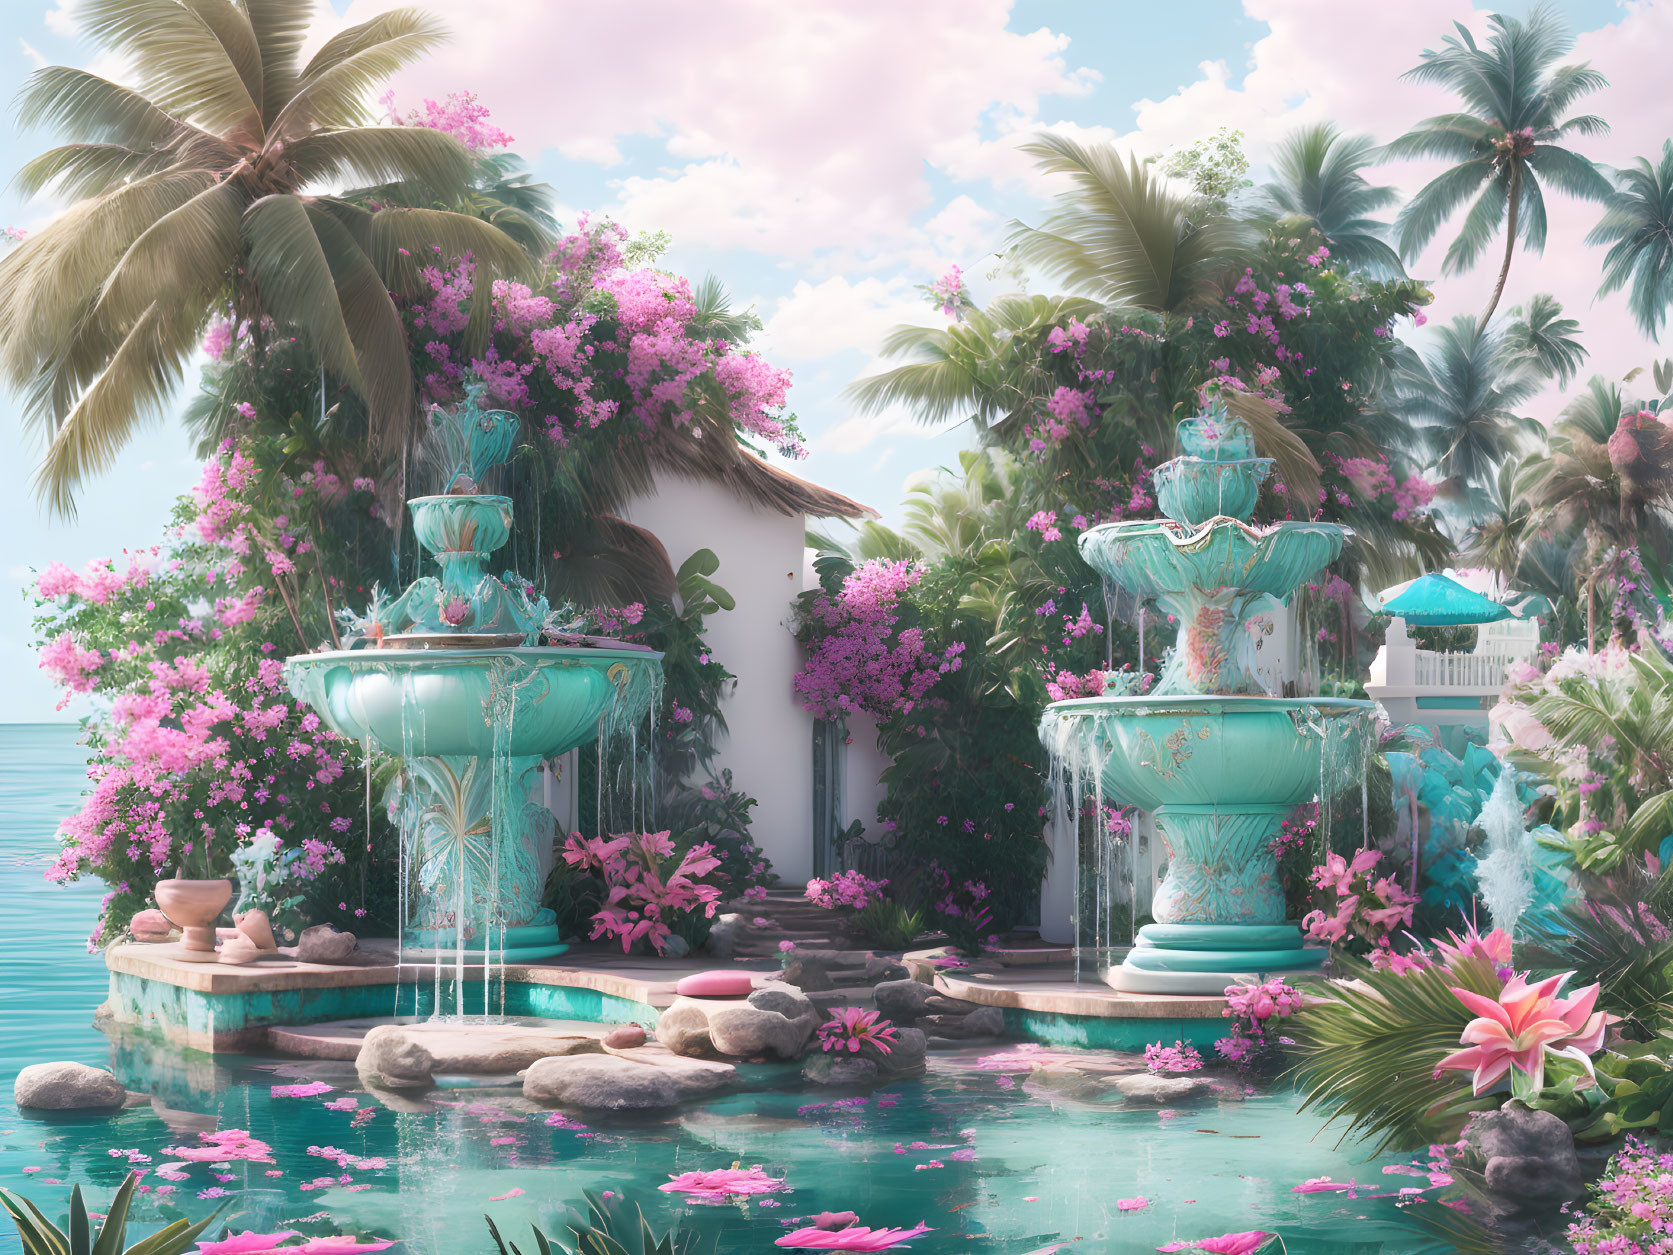 Tranquil Tropical Landscape with Pink Blossoms and Turquoise Fountains